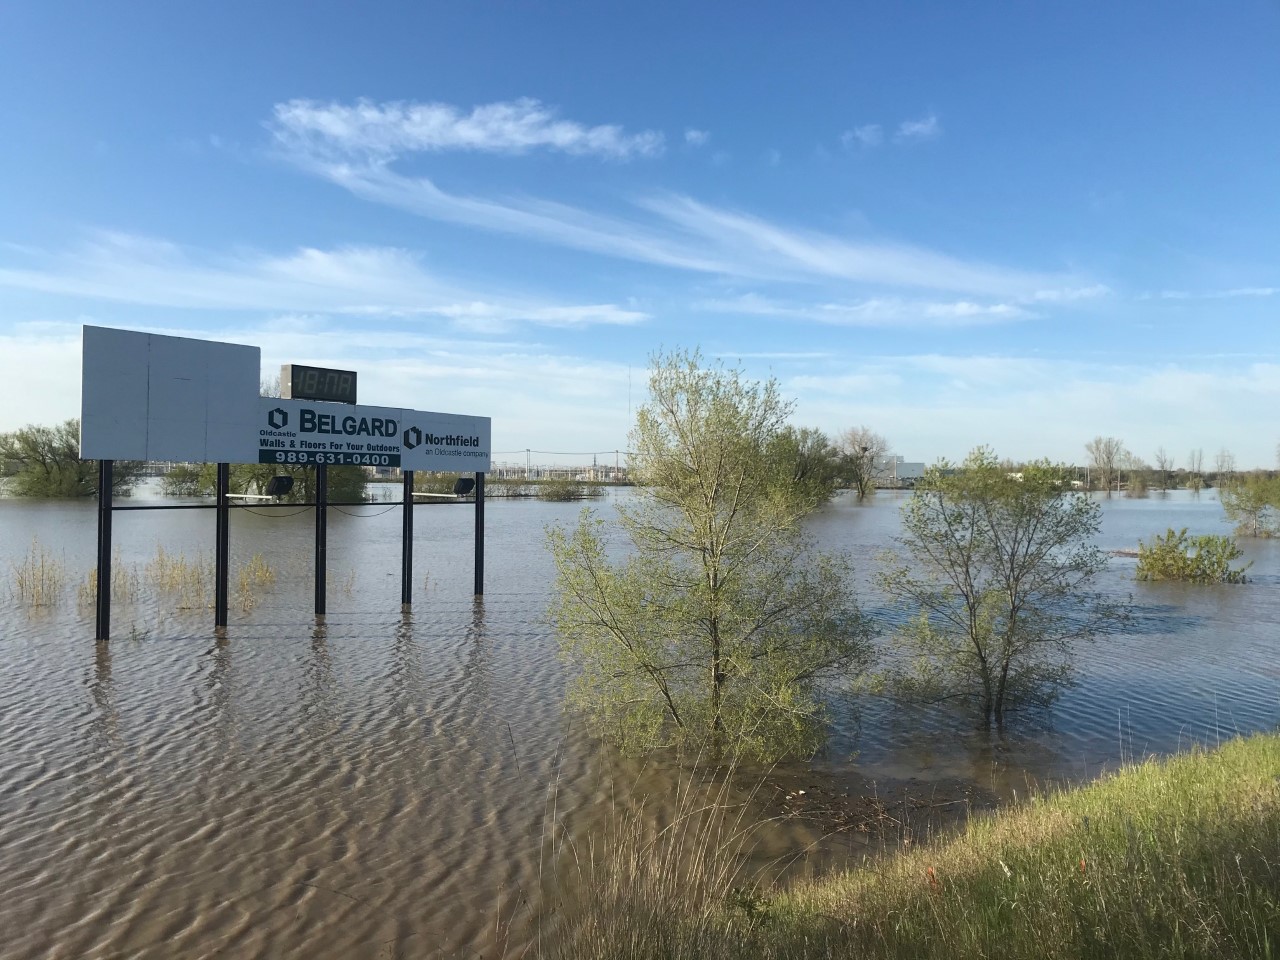 Michigan Flooding Is A Climate Change Problem Too - WDET